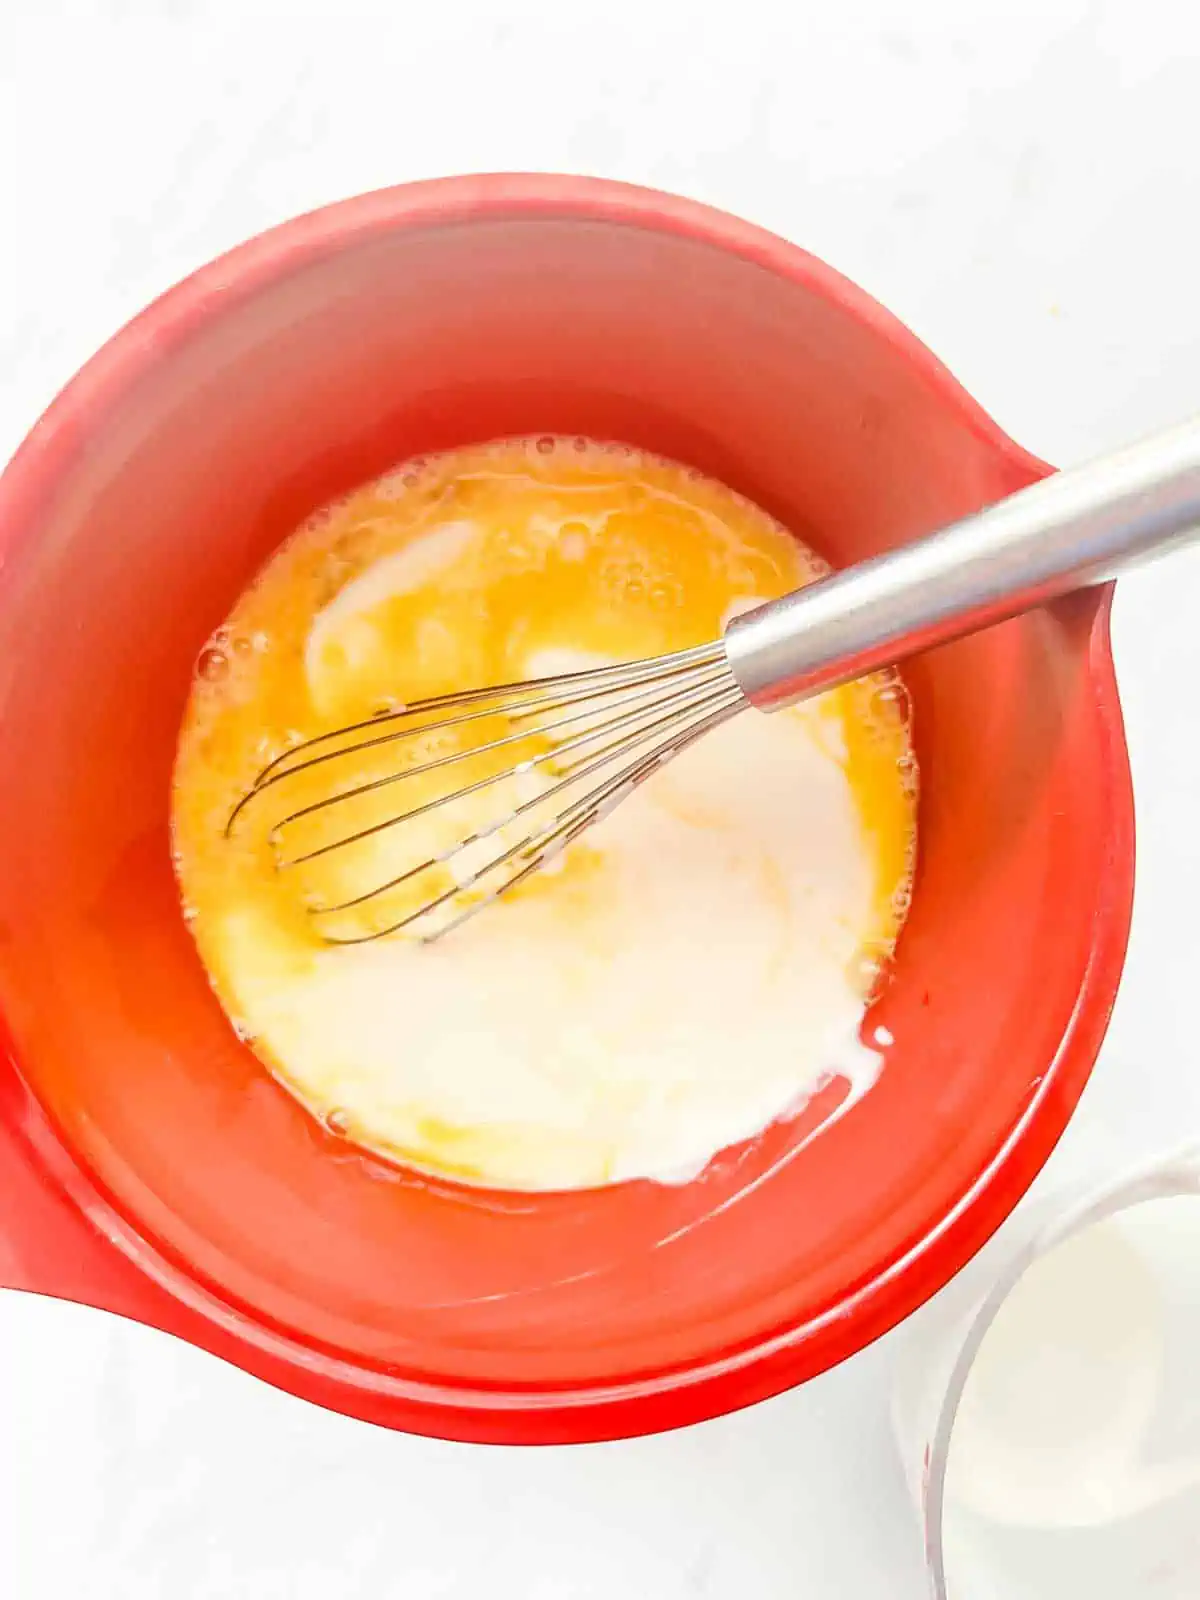 Buttermilk that has been added to egg in a large bowl.